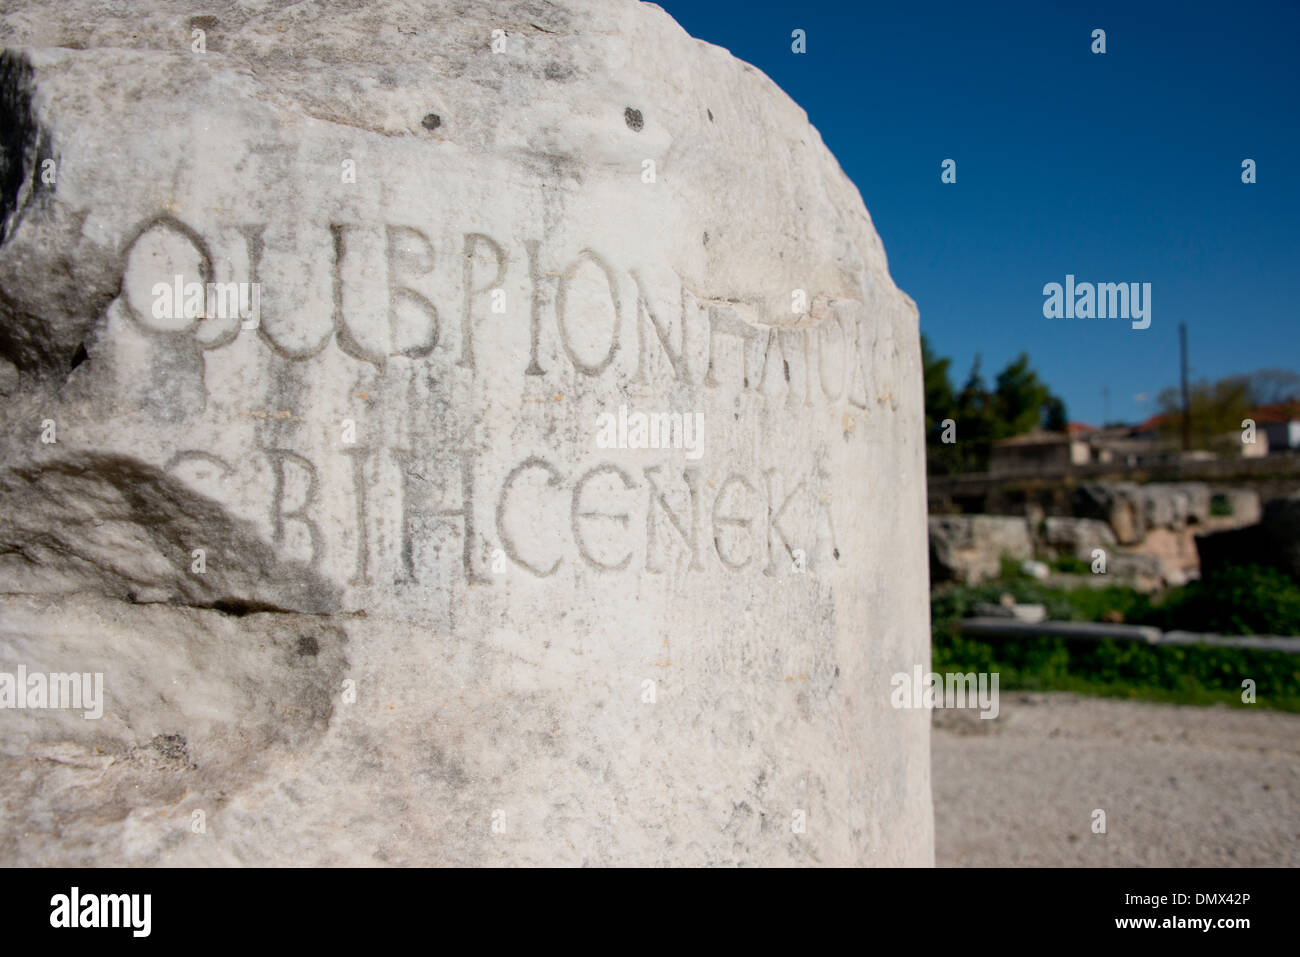 Greece, Corinth, Ancient Corinth. Carved text on marble. Stock Photo